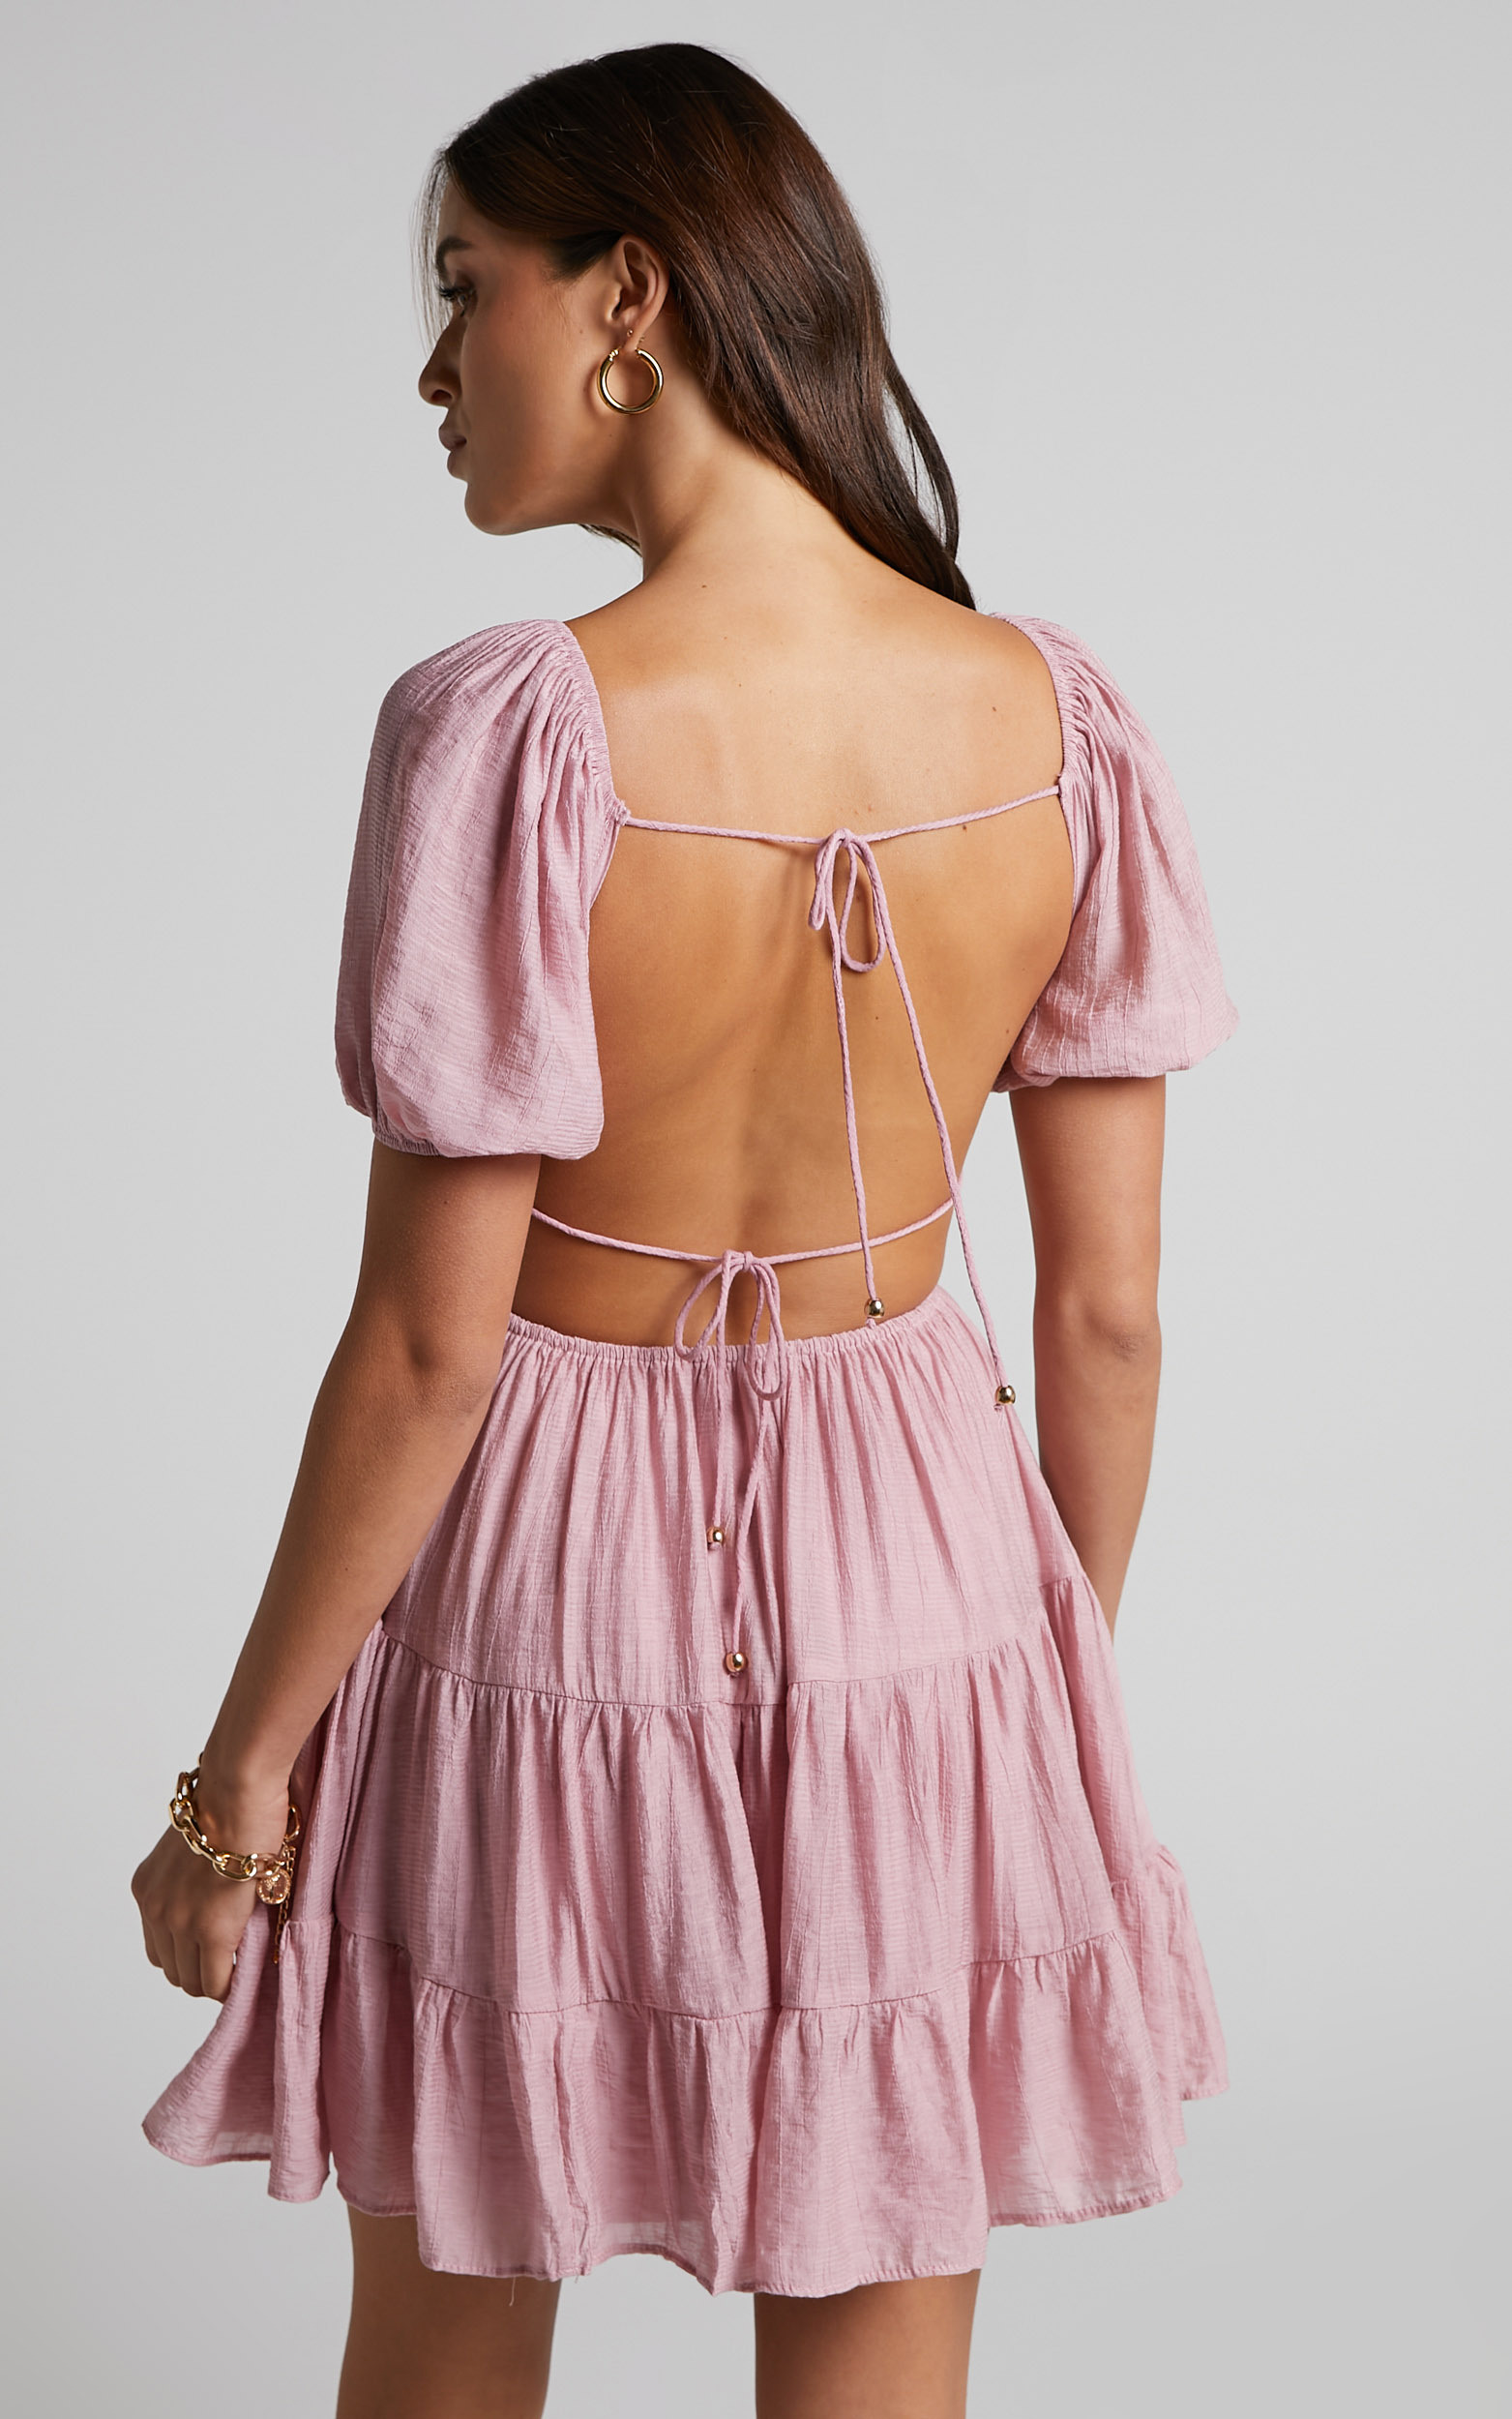 Shayna Mini Dress - Open Back Puff Sleeve Tiered Dress in Pink - 06, PNK1, hi-res image number null